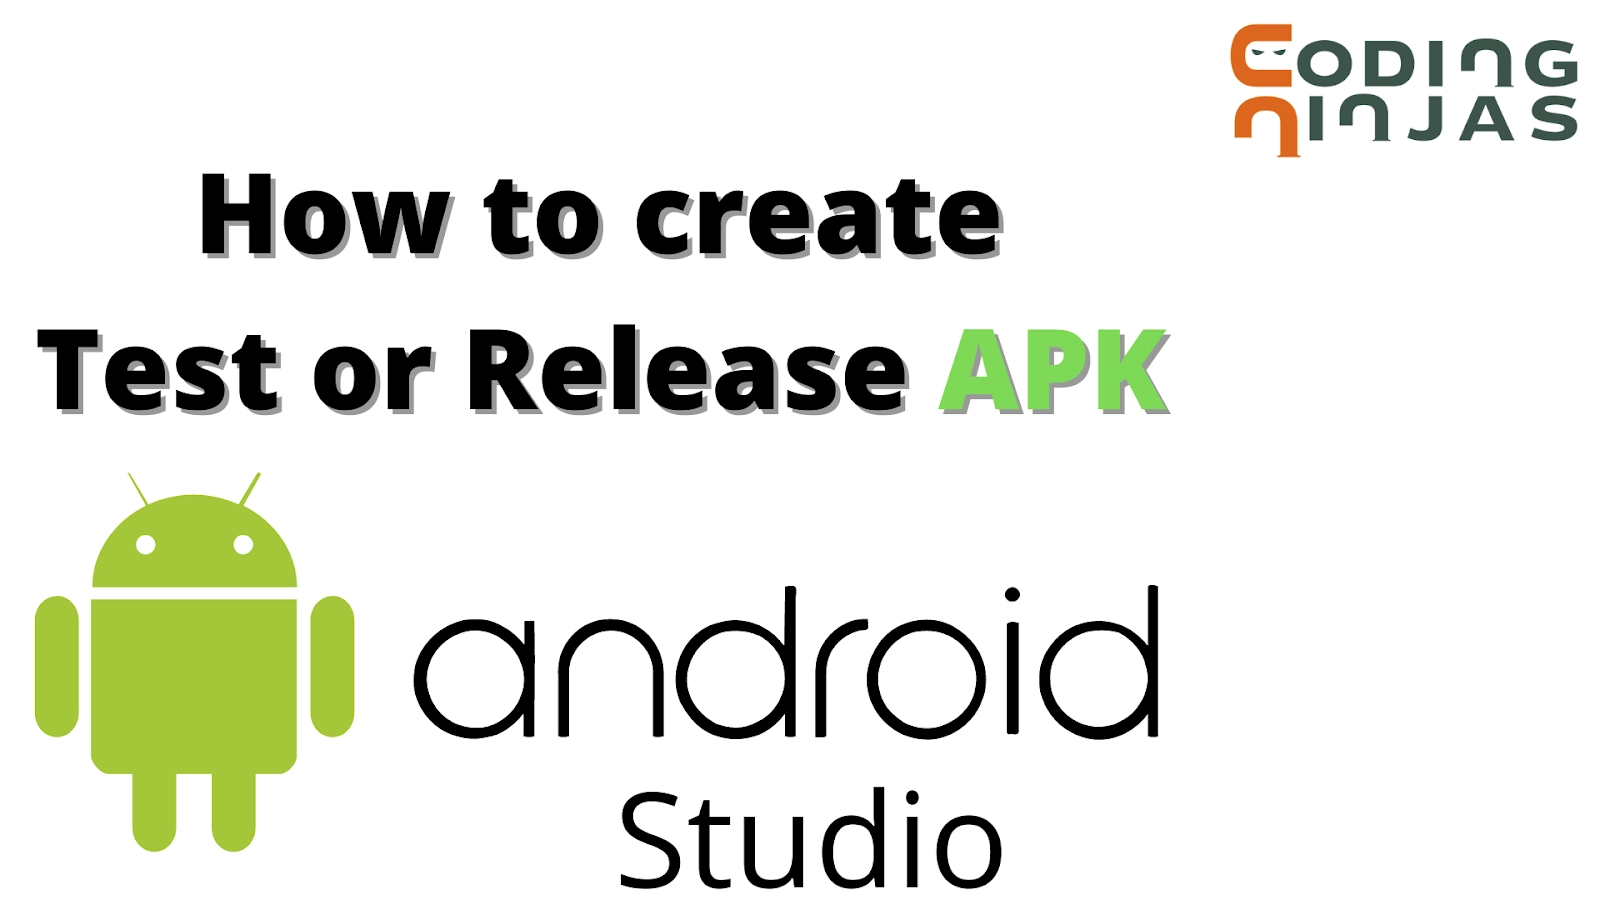 Online Compiler and Debugger APK for Android Download